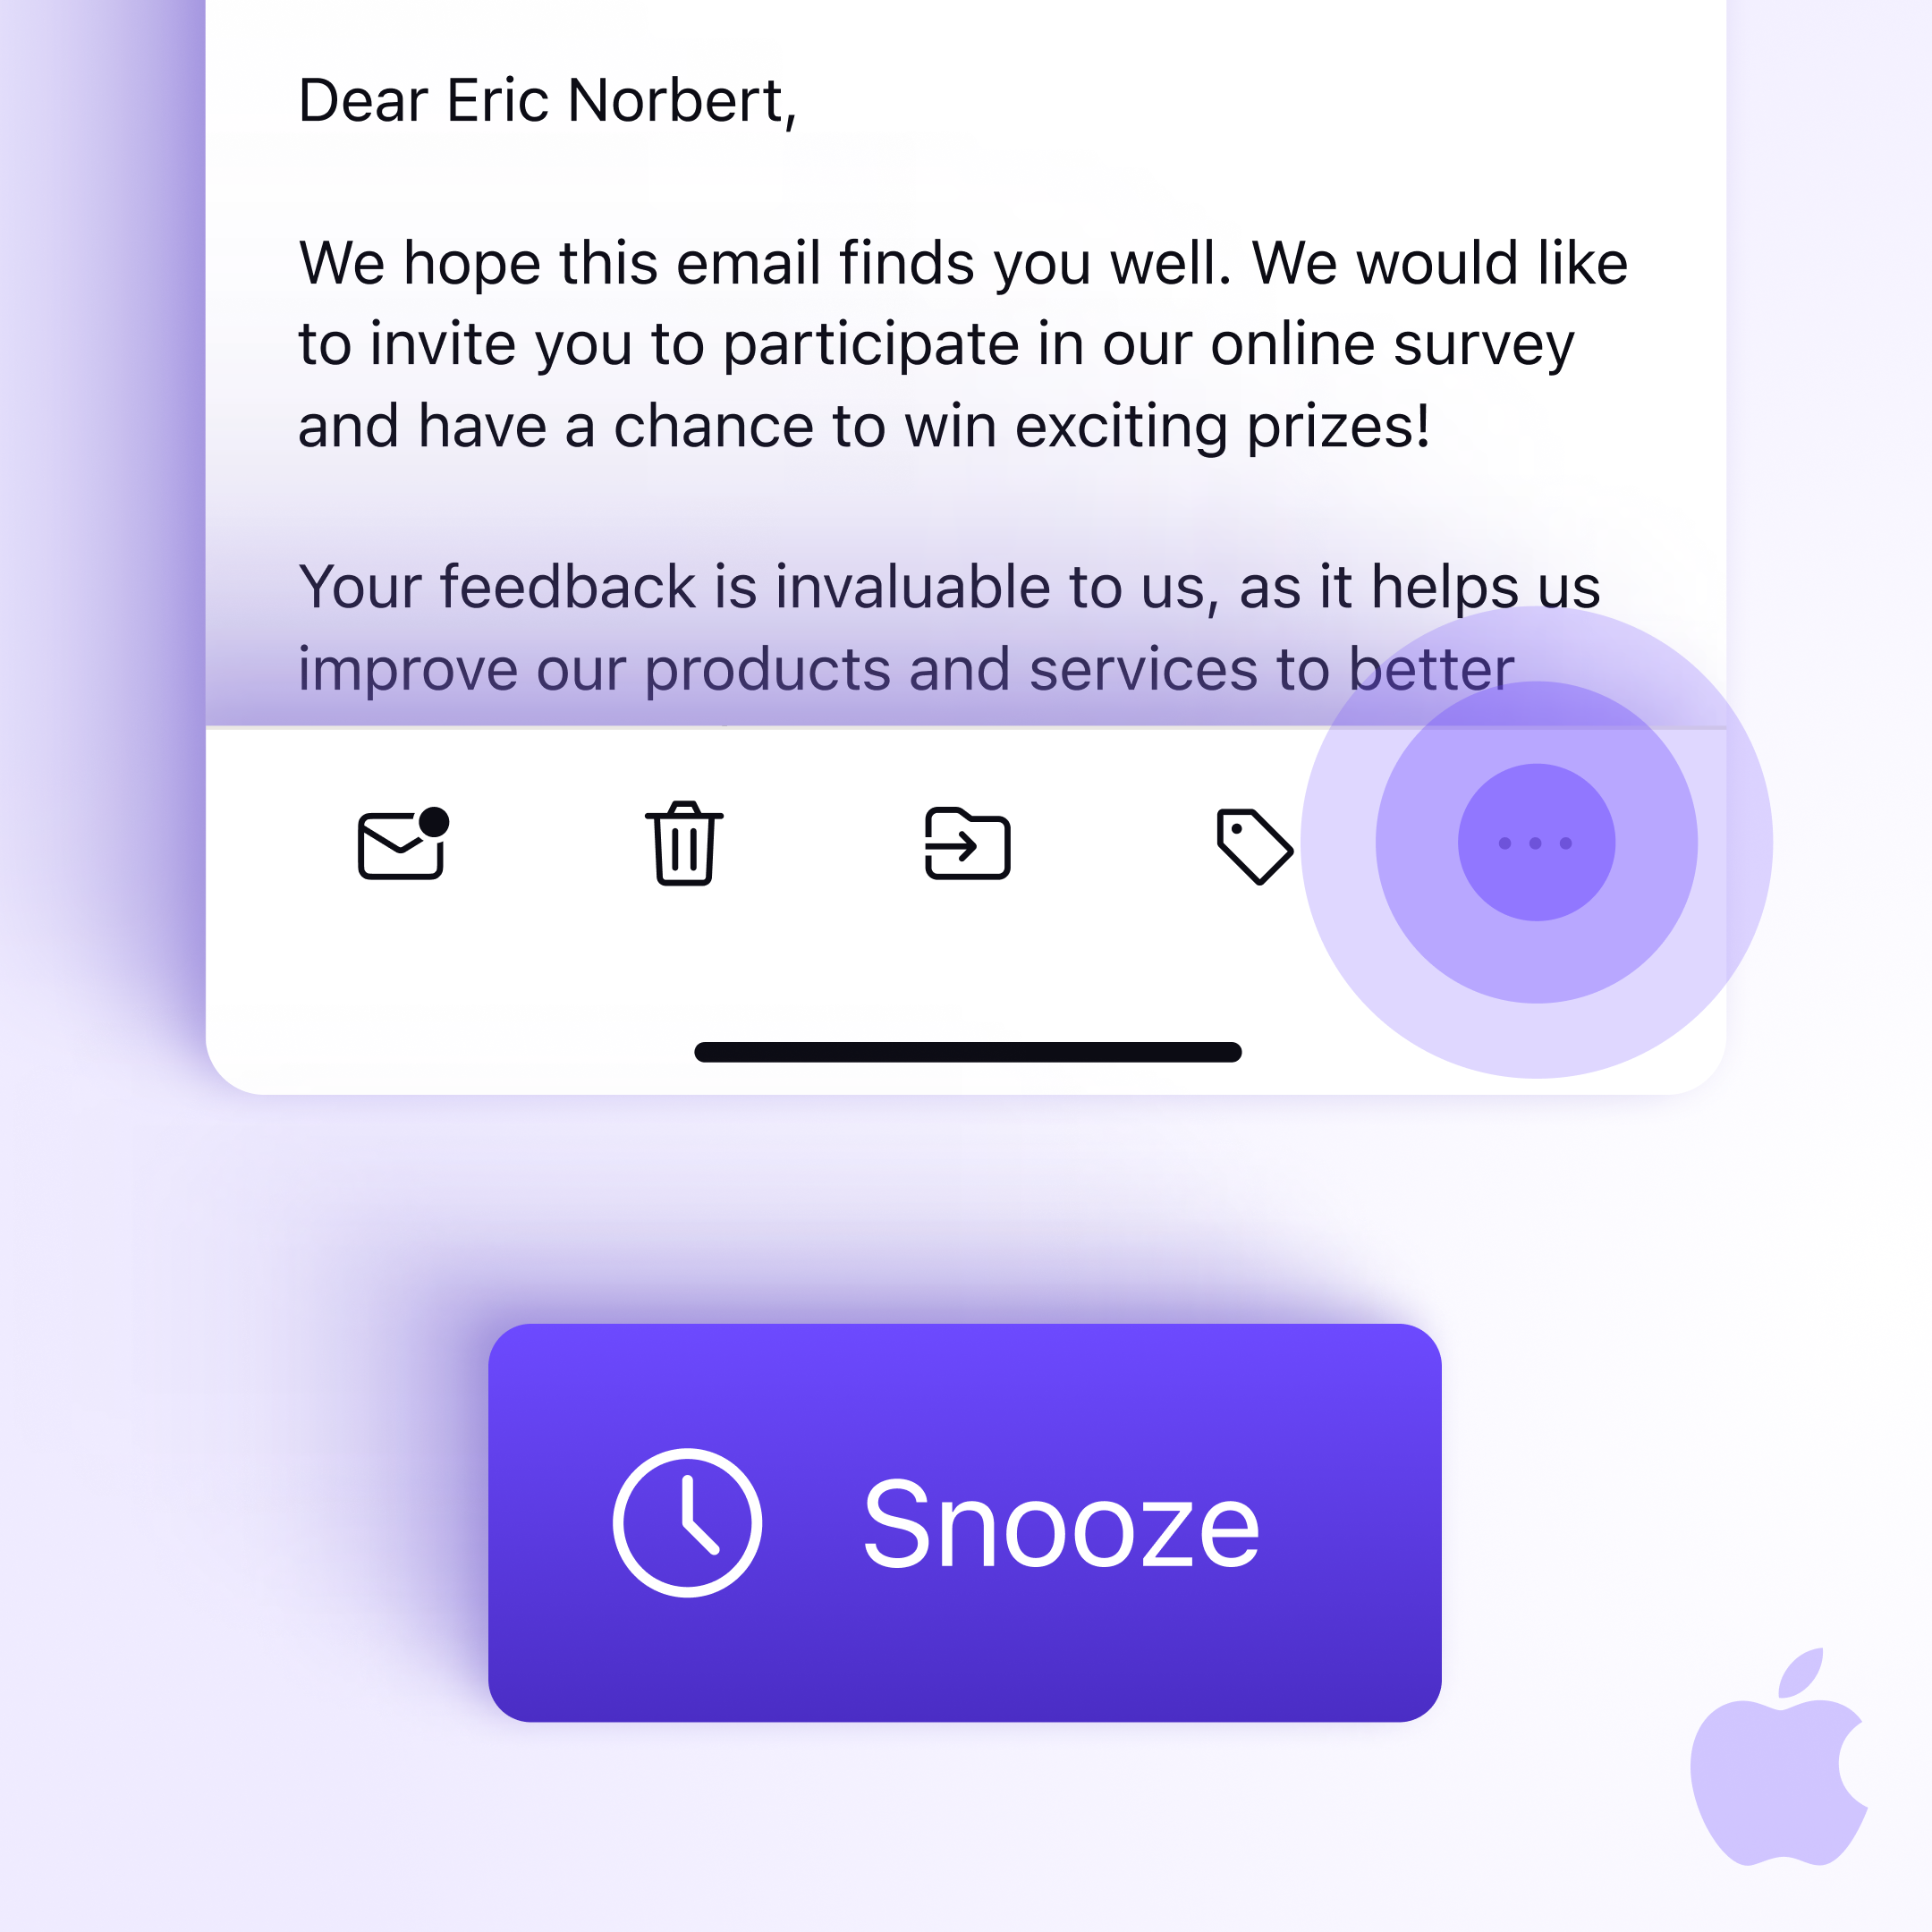 The image is showing how to choose the "Snooze" option from the "more" menu when you open an email in the Proton Mail iOS app. 